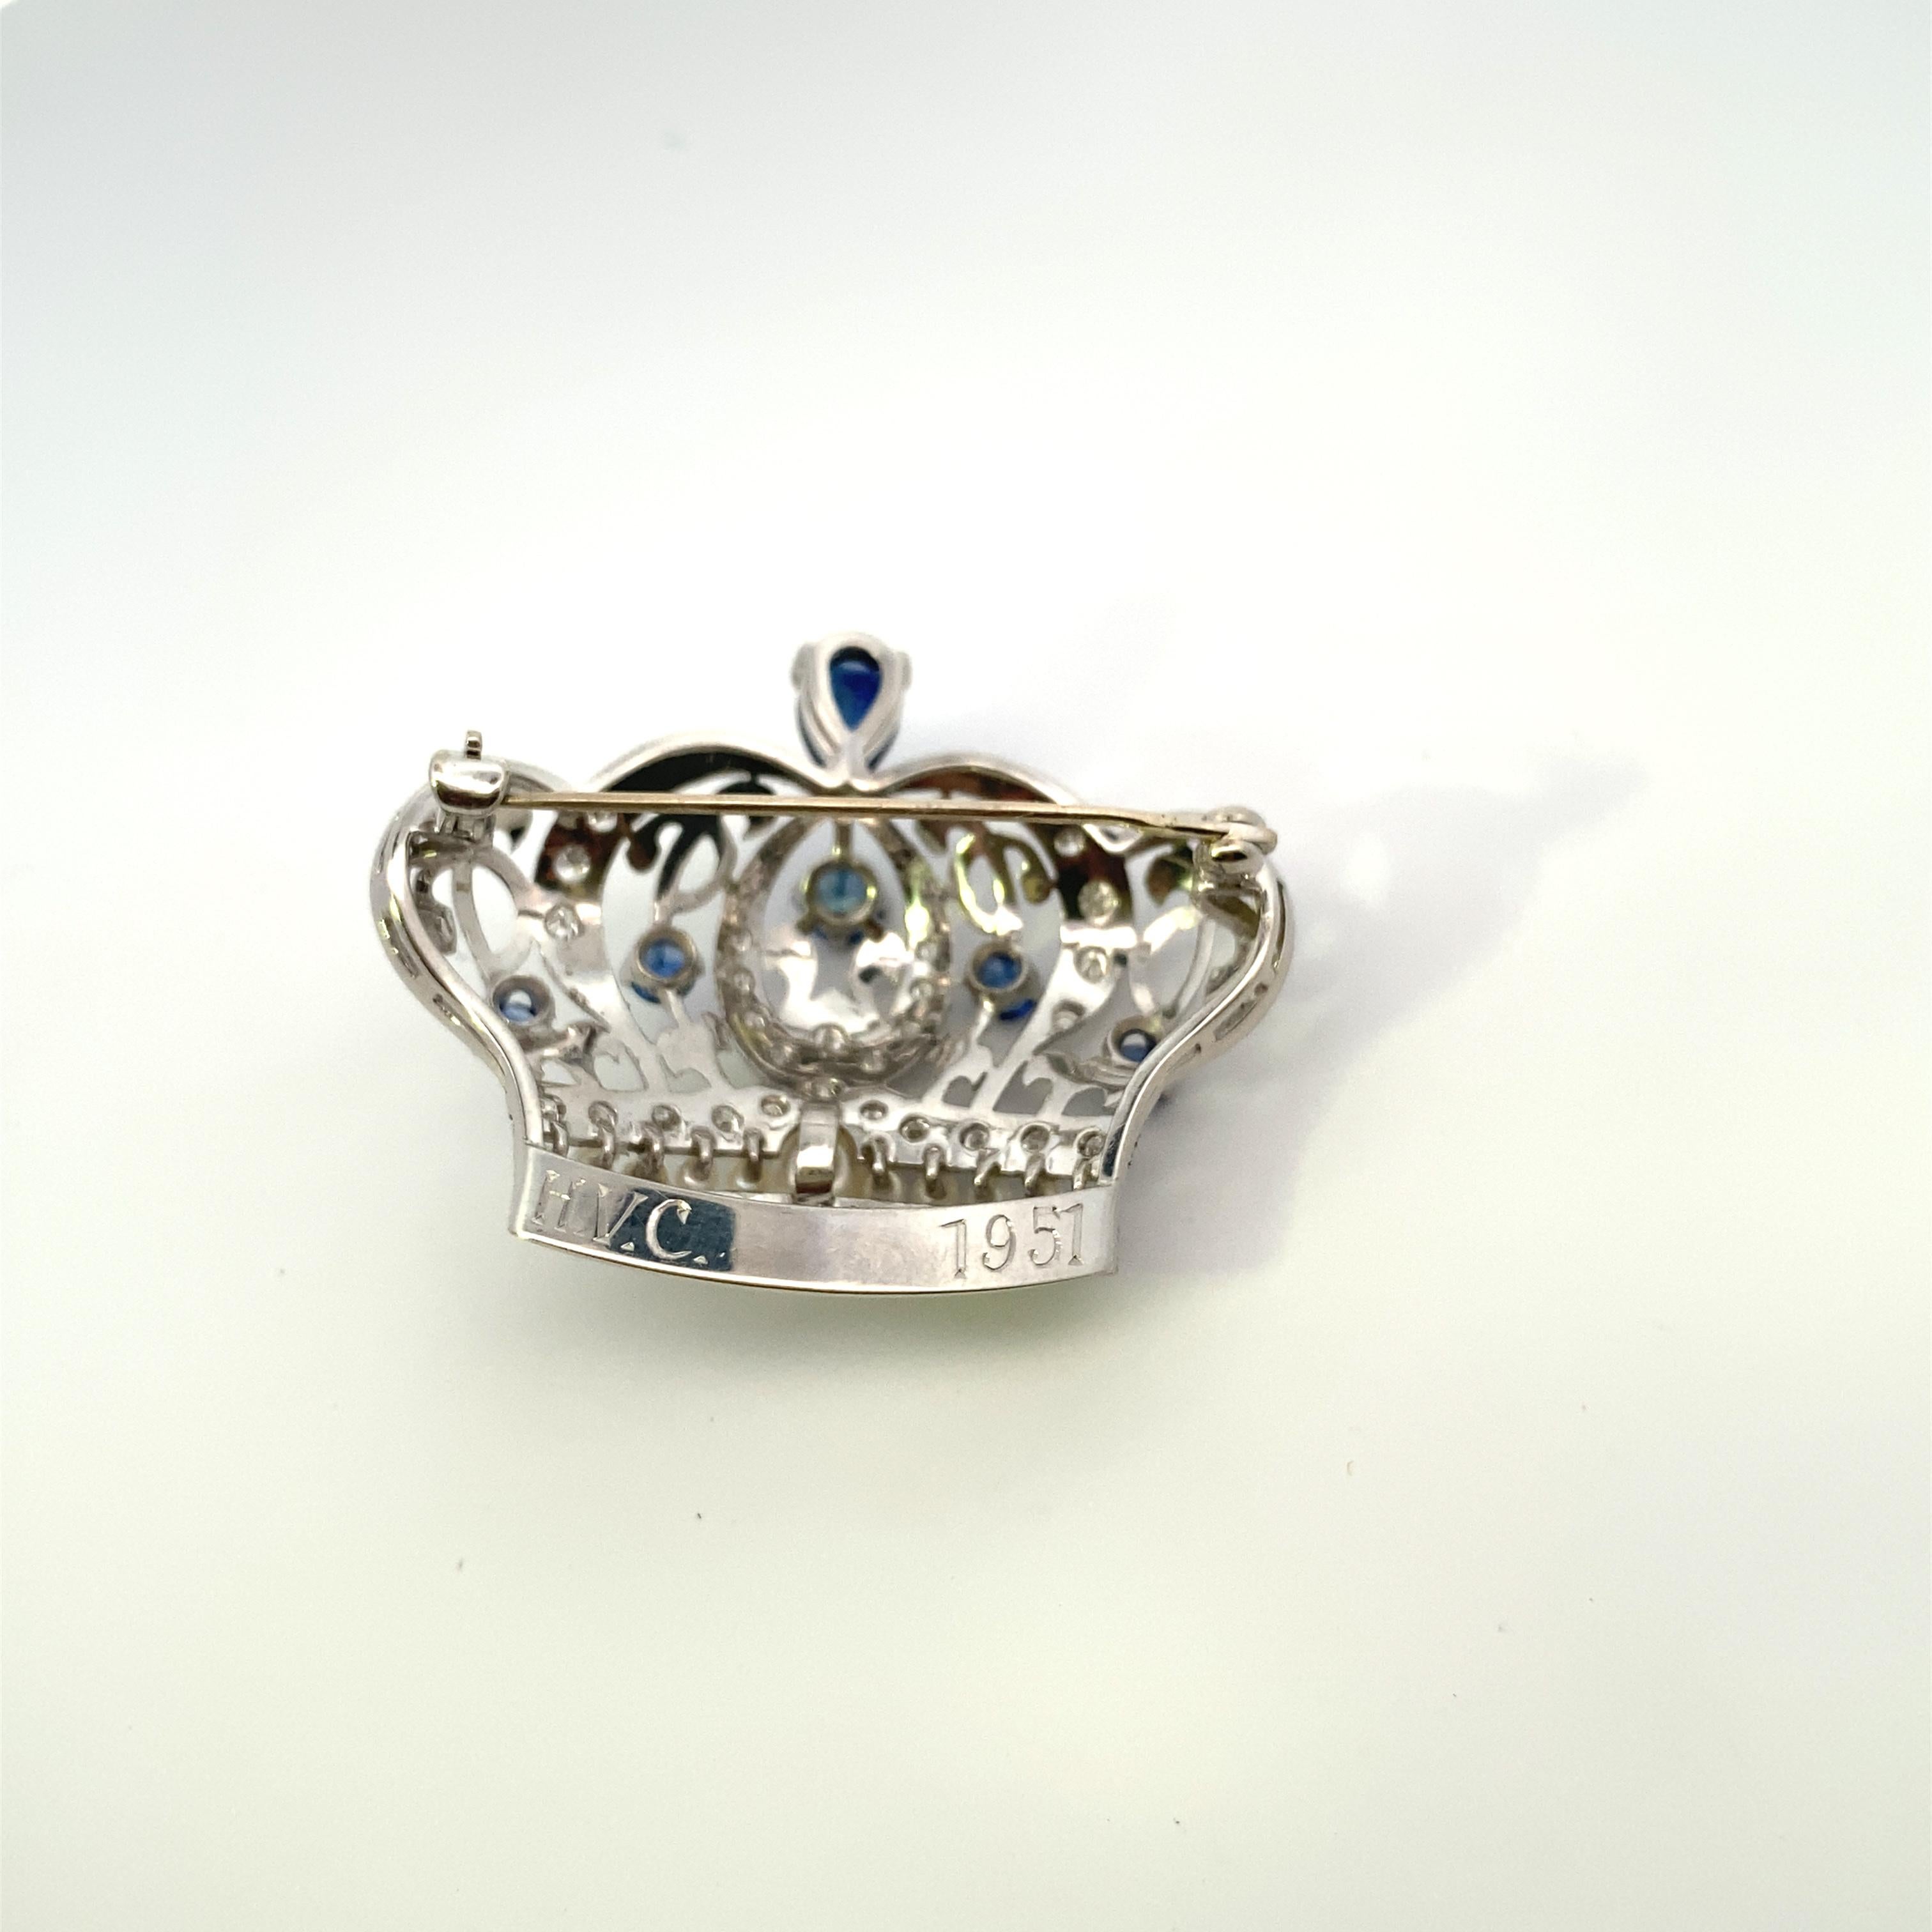 Edwardian-Styled Platinum Crown Brooch with Sapphires, Diamonds and Pearls 1